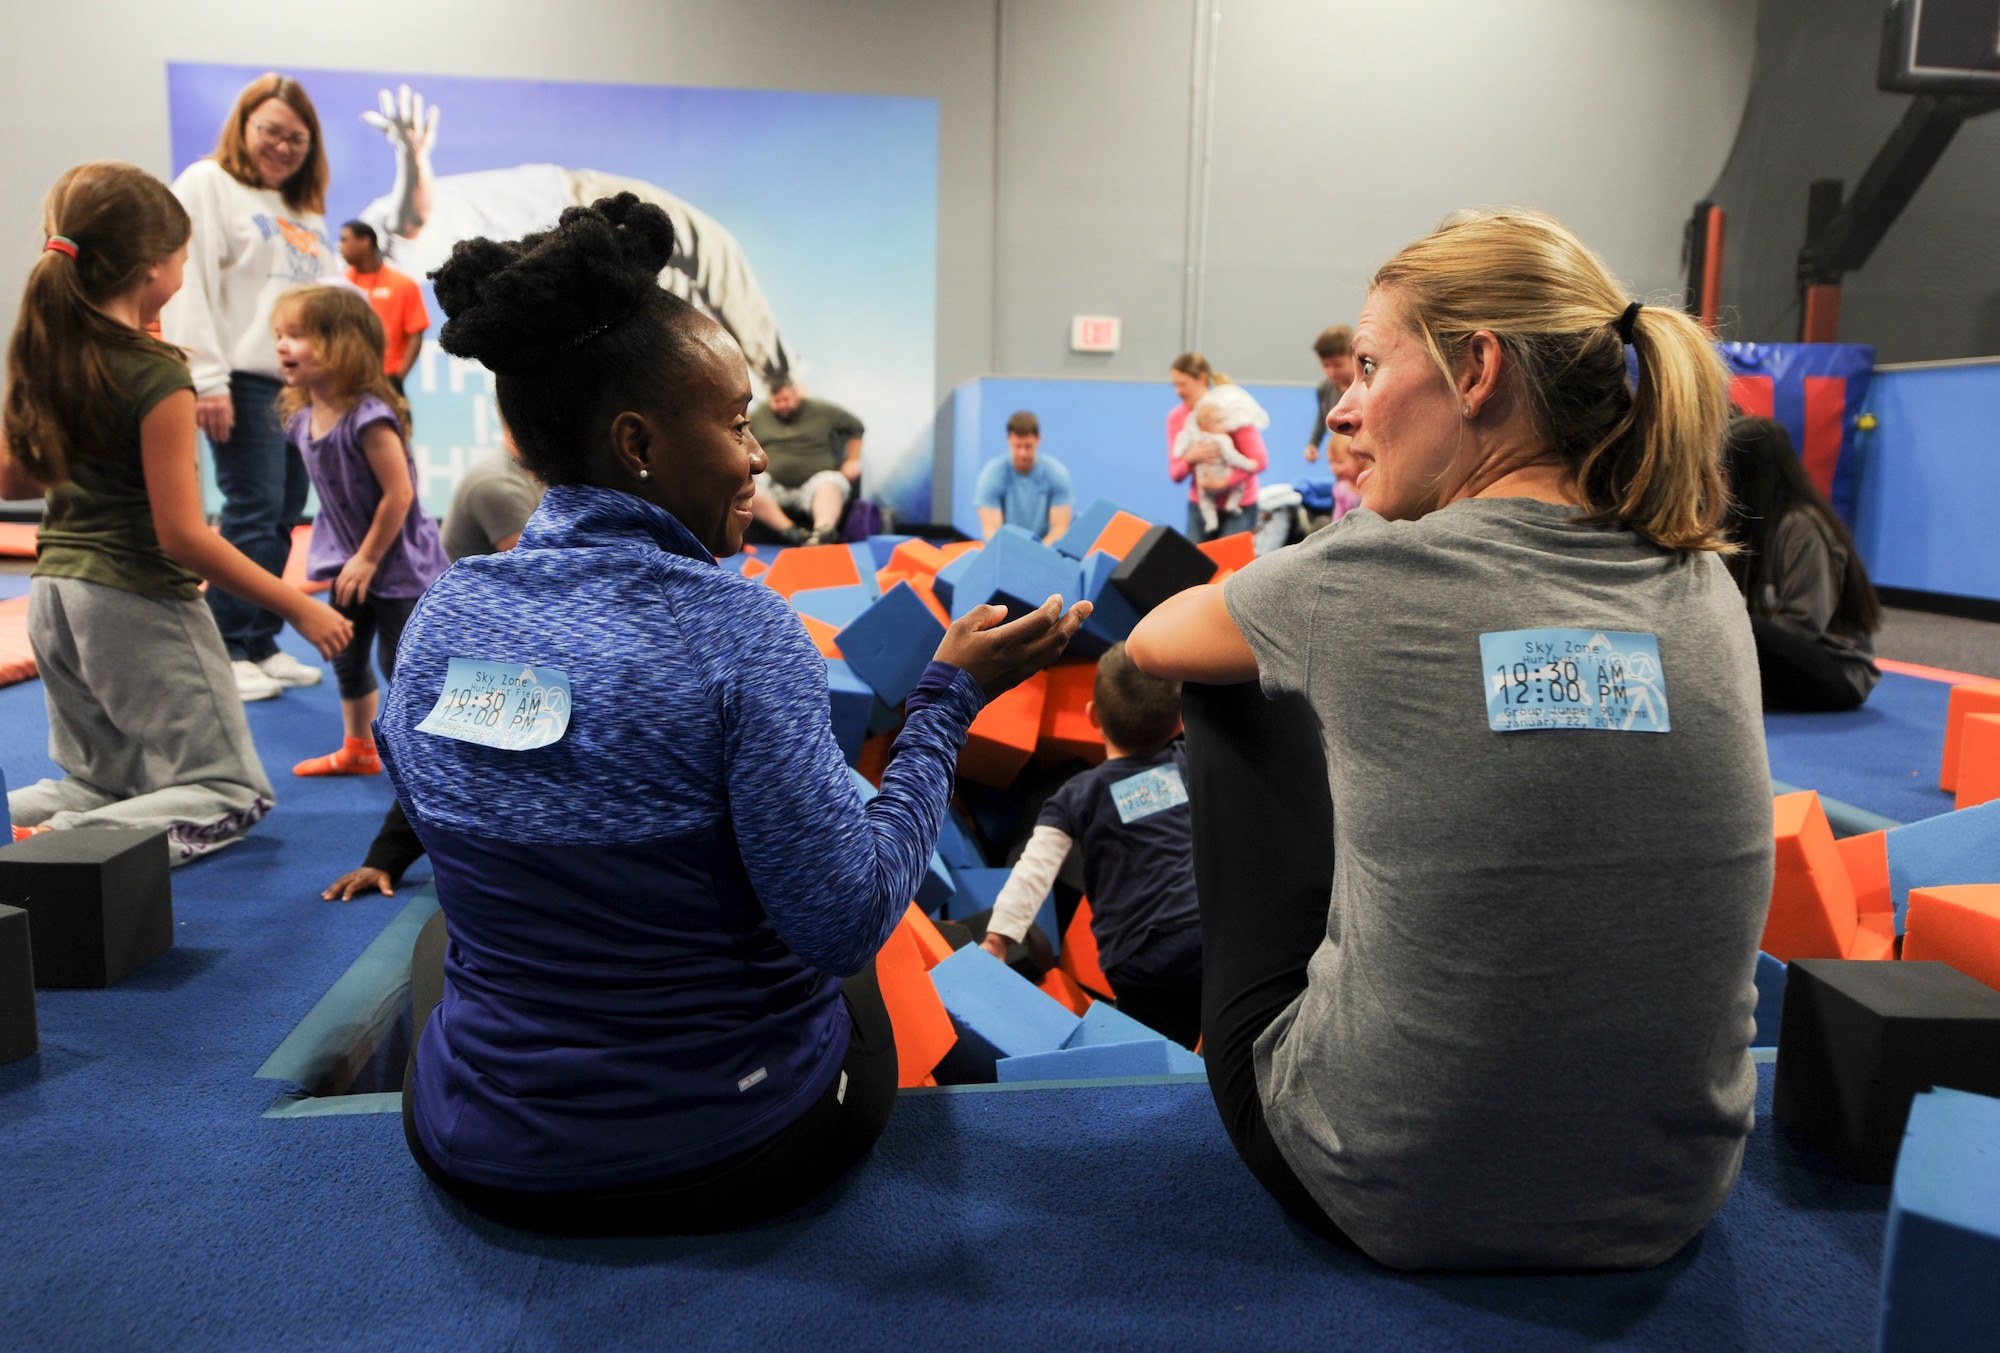 Spouses of deployed Air Commandos mingle during a Hearts Apart event while their children play at the Sky Zone in Pensacola, Fla., Jan. 28, 2017. Hearts Apart offers support to spouses and loved ones of deployed service members through activities, outings, monthly newsletters and other resources. (U.S. Air Force photo by Senior Airman Kasie P. Whitfield)